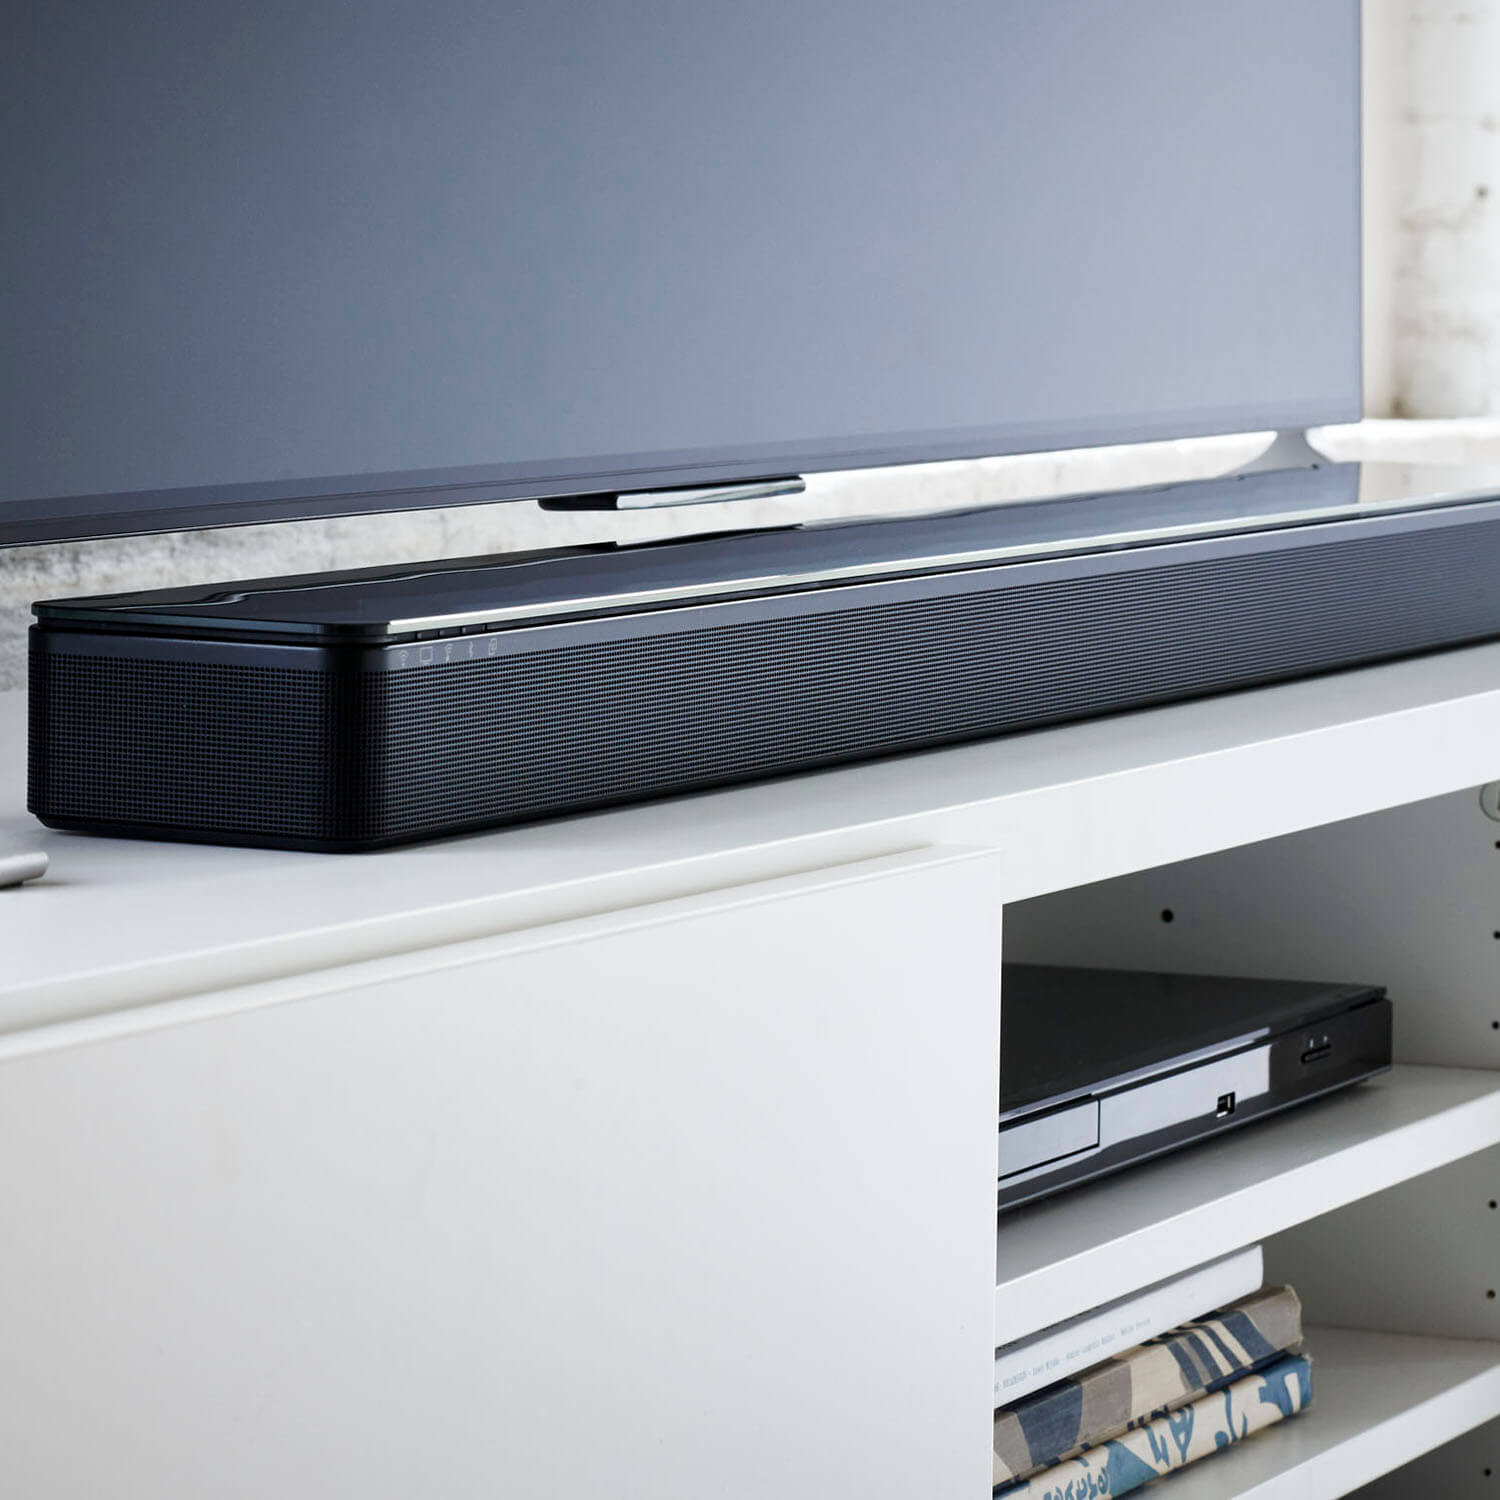 Get Bose SoundTouch & Experience Difference! Contact Us Today!